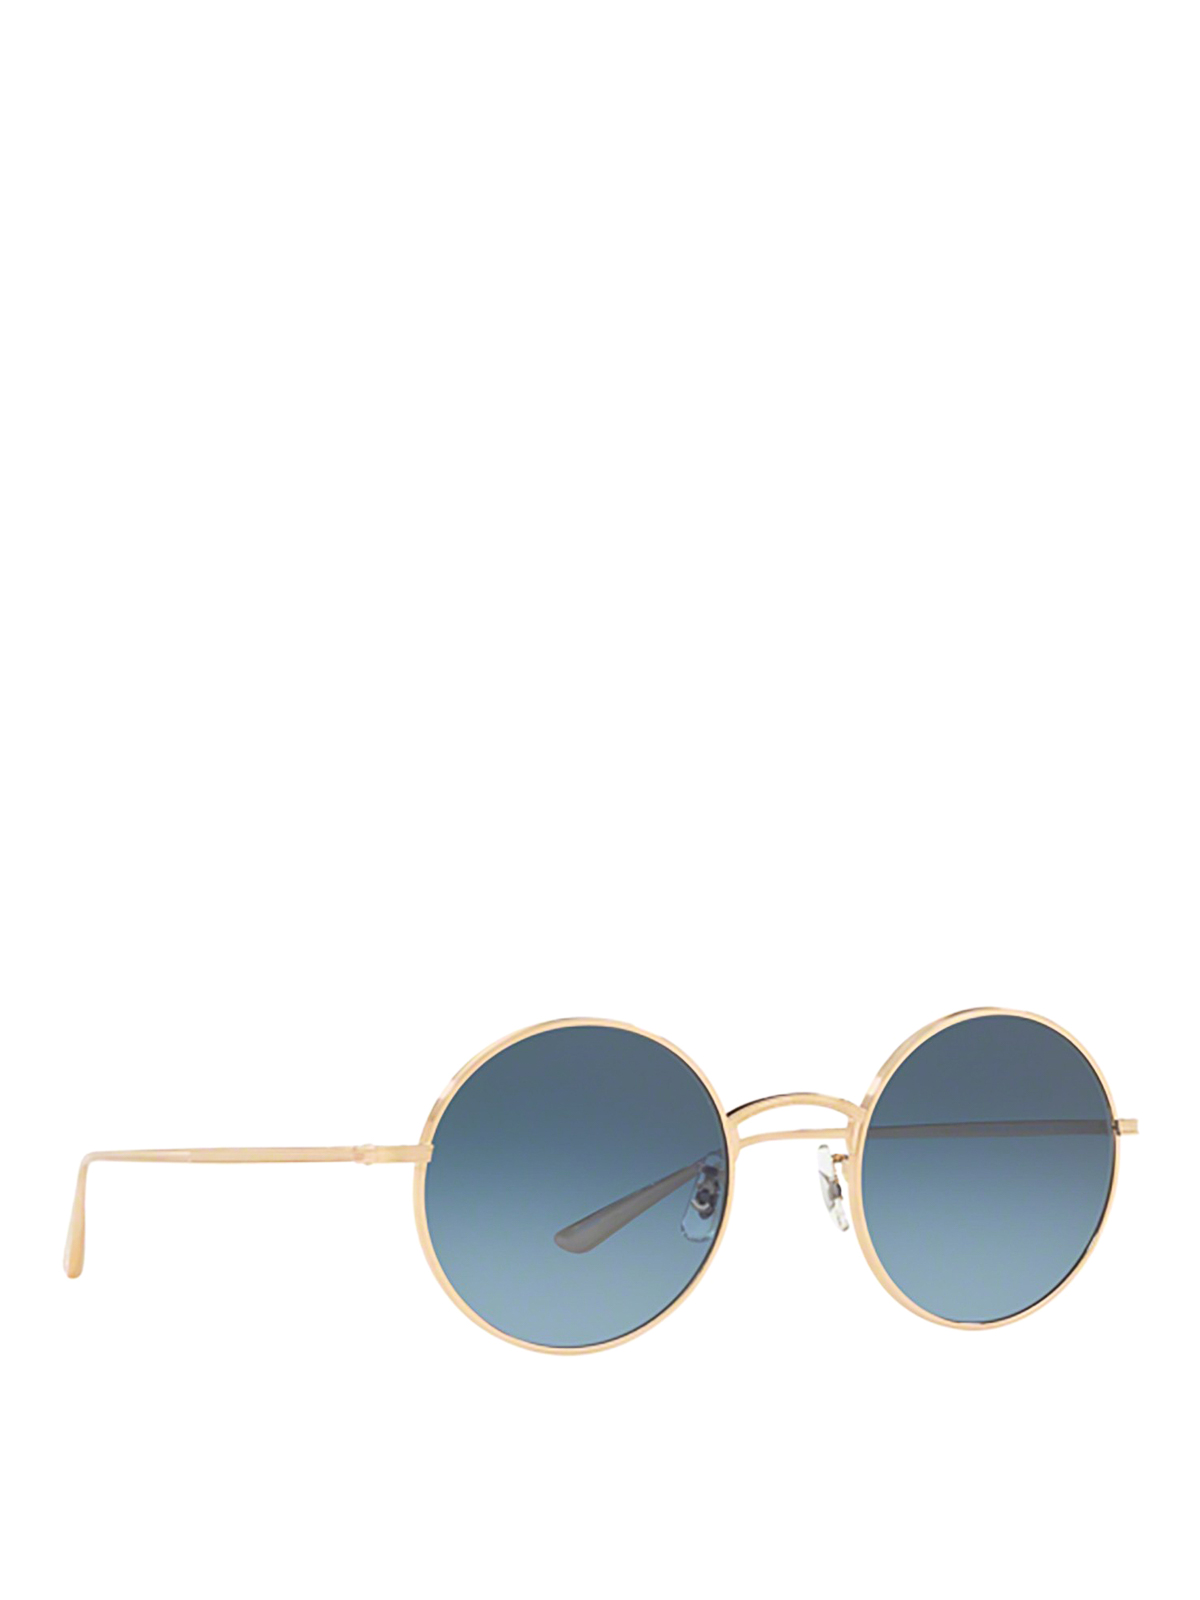 Sunglasses Oliver Peoples - The Row after Midnight round sunglasses -  OV1197ST5035Q8